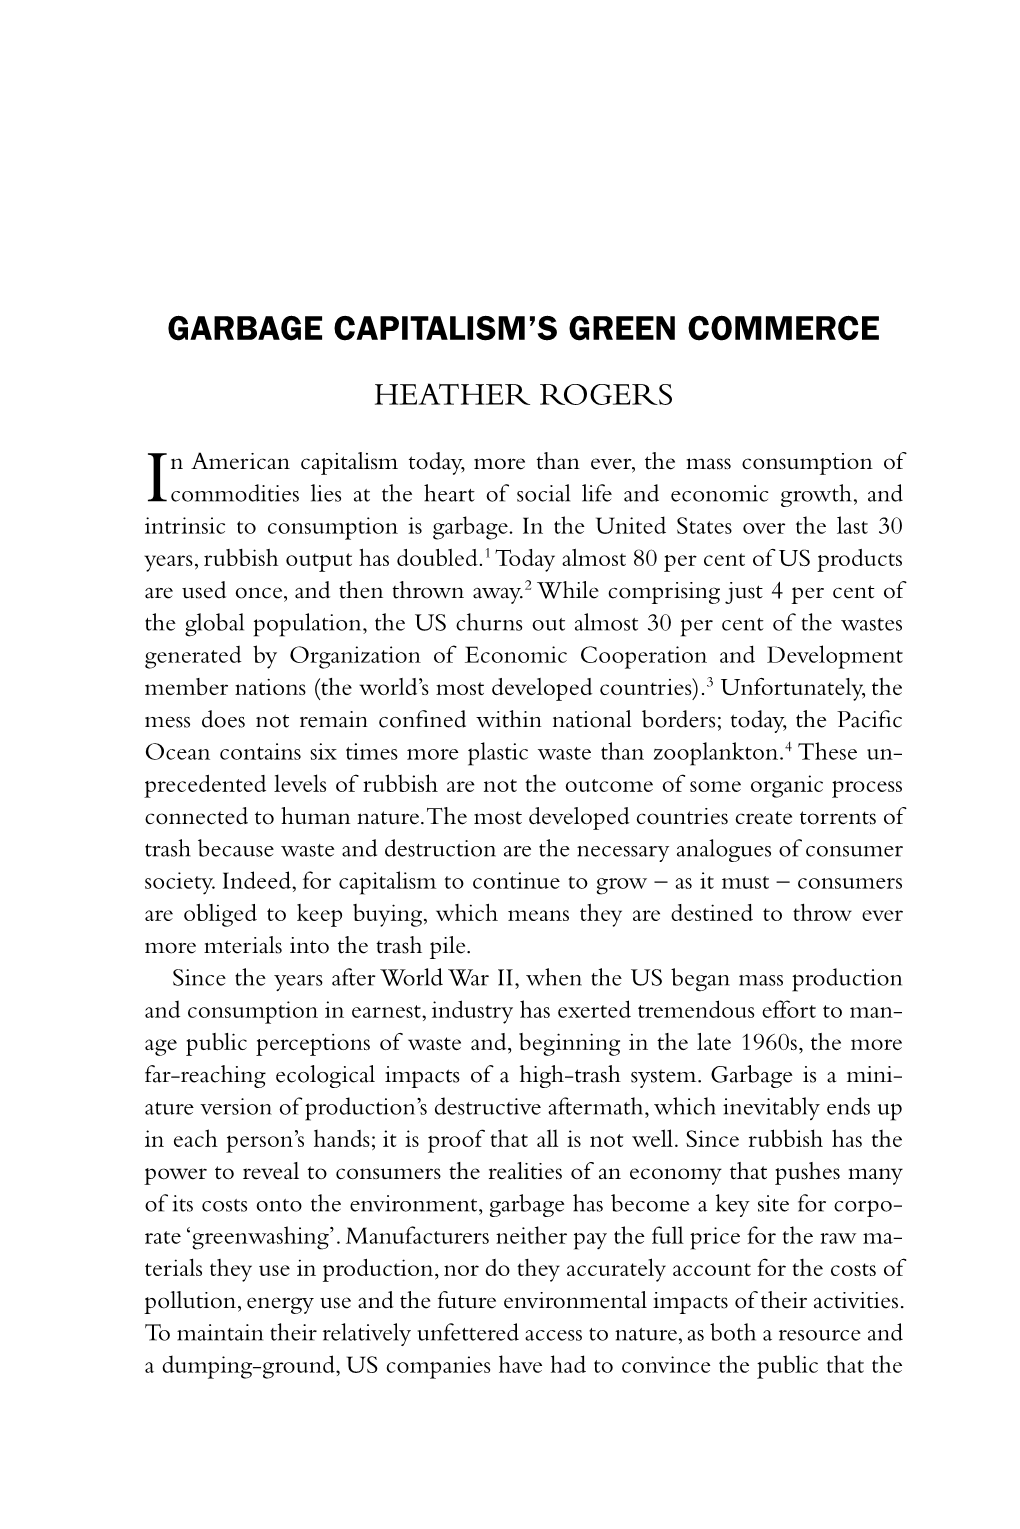 Garbage Capitalism's Green Commerce